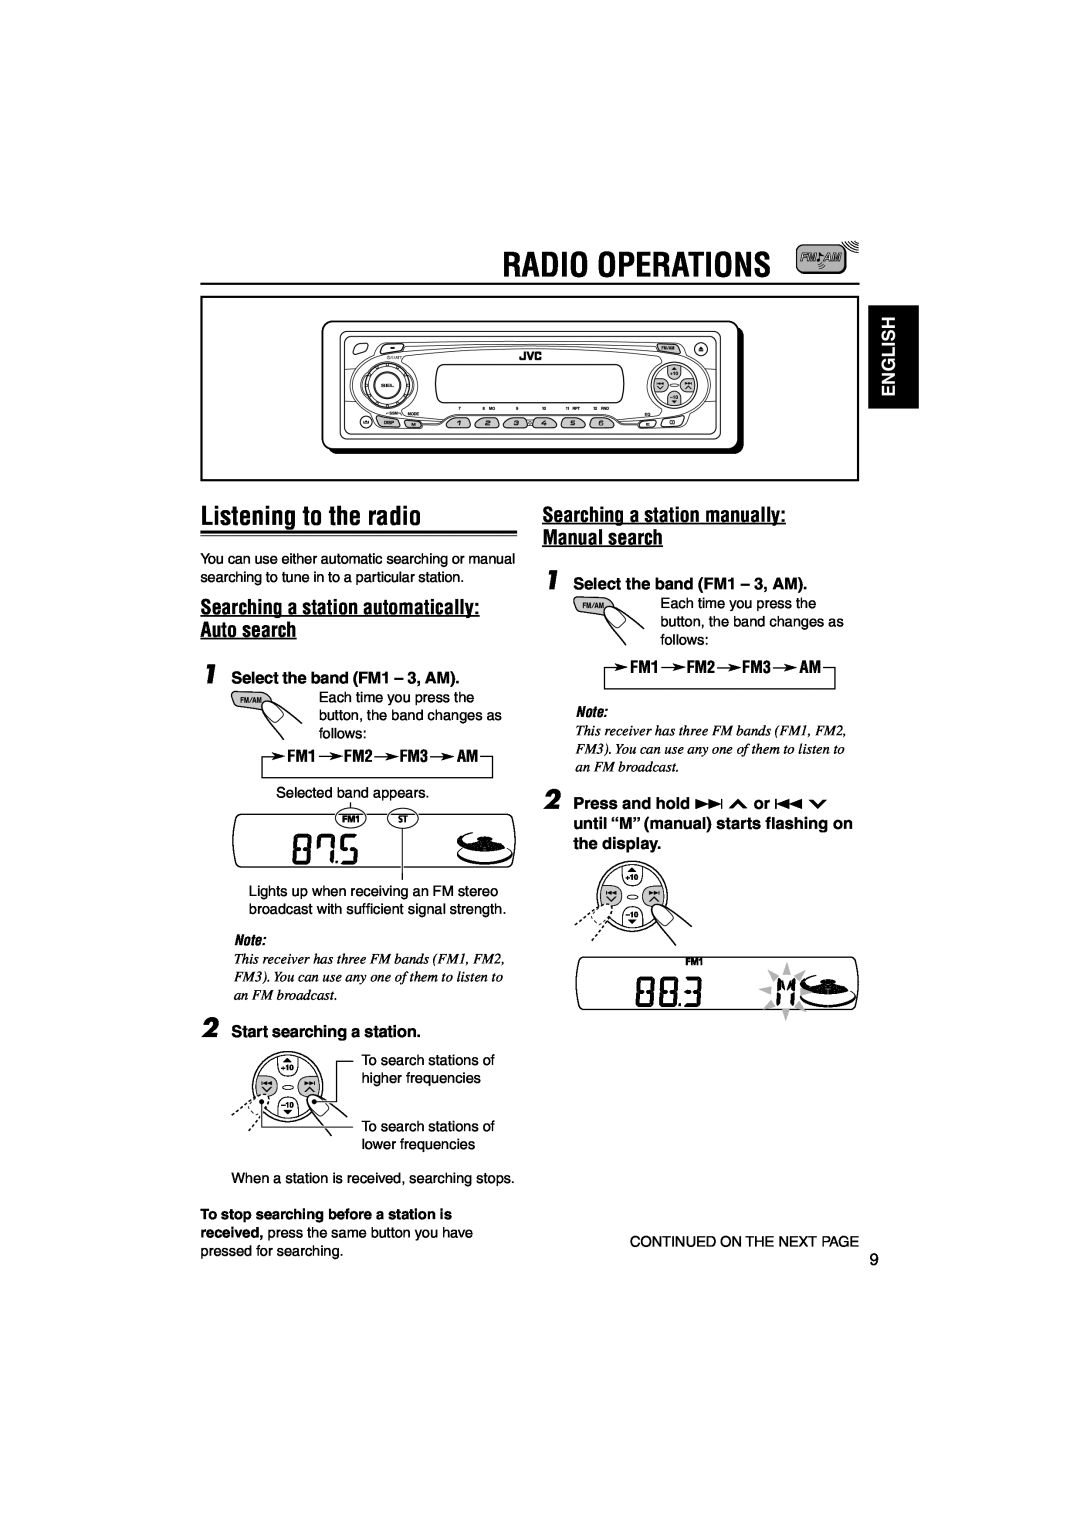 JVC KD-S795 manual Radio Operations, Listening to the radio, Searching a station automatically Auto search, English 